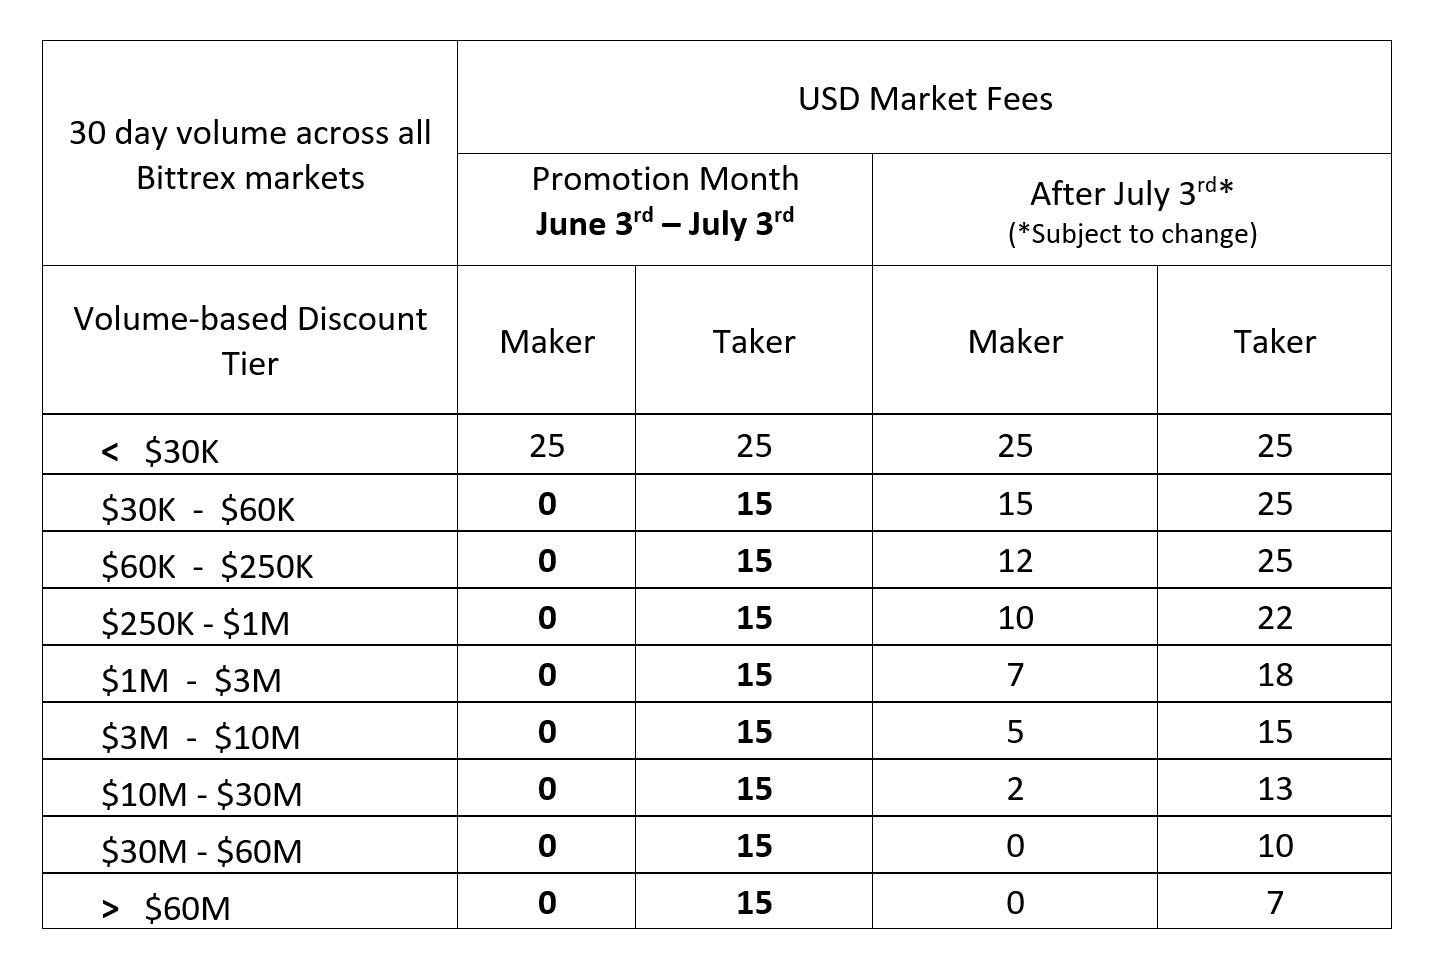 Bittrex to Offer Trading Fees as Low as 0 for USD Markets